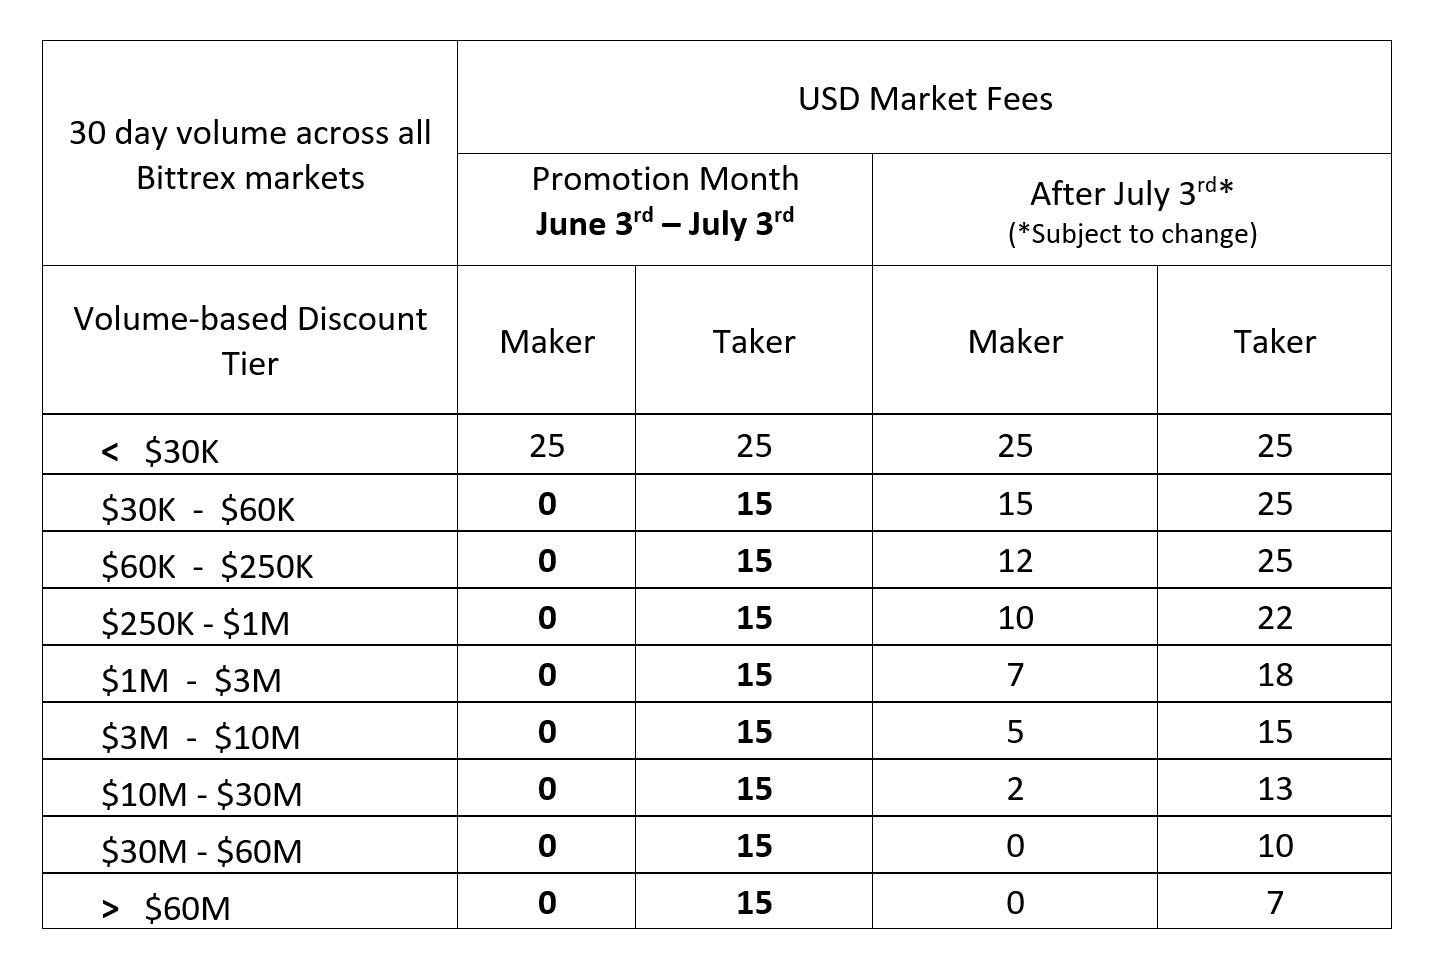 Bittrex to Offer Trading Fees as Low as 0 for USD Markets